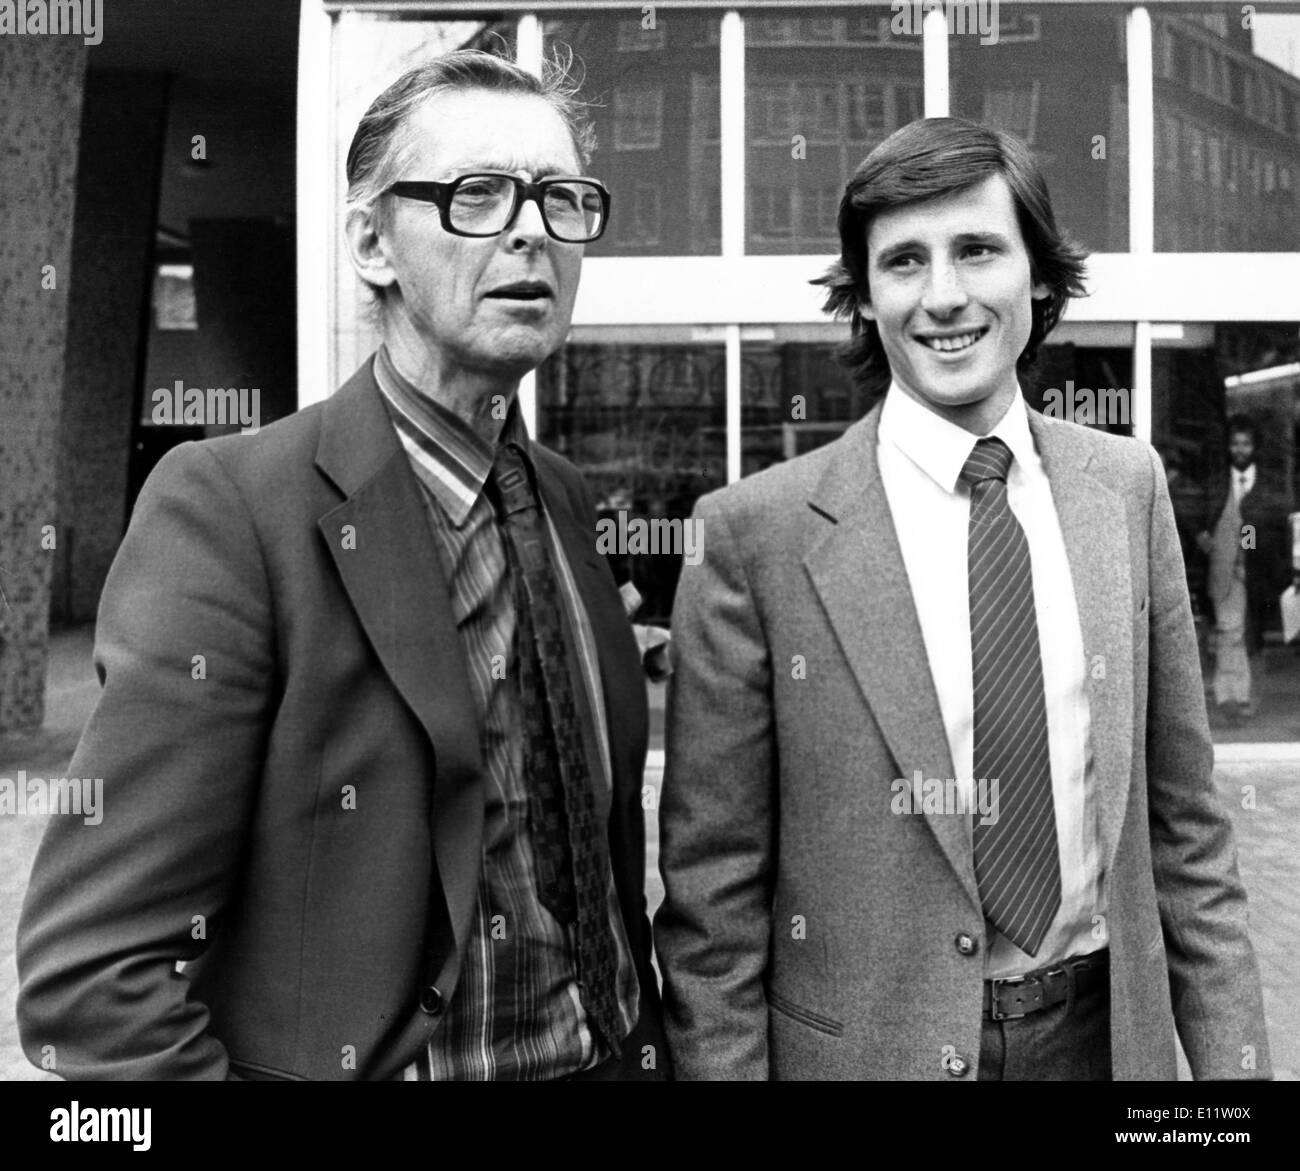 Runner Sebastian Coe with father at Olympics Stock Photo